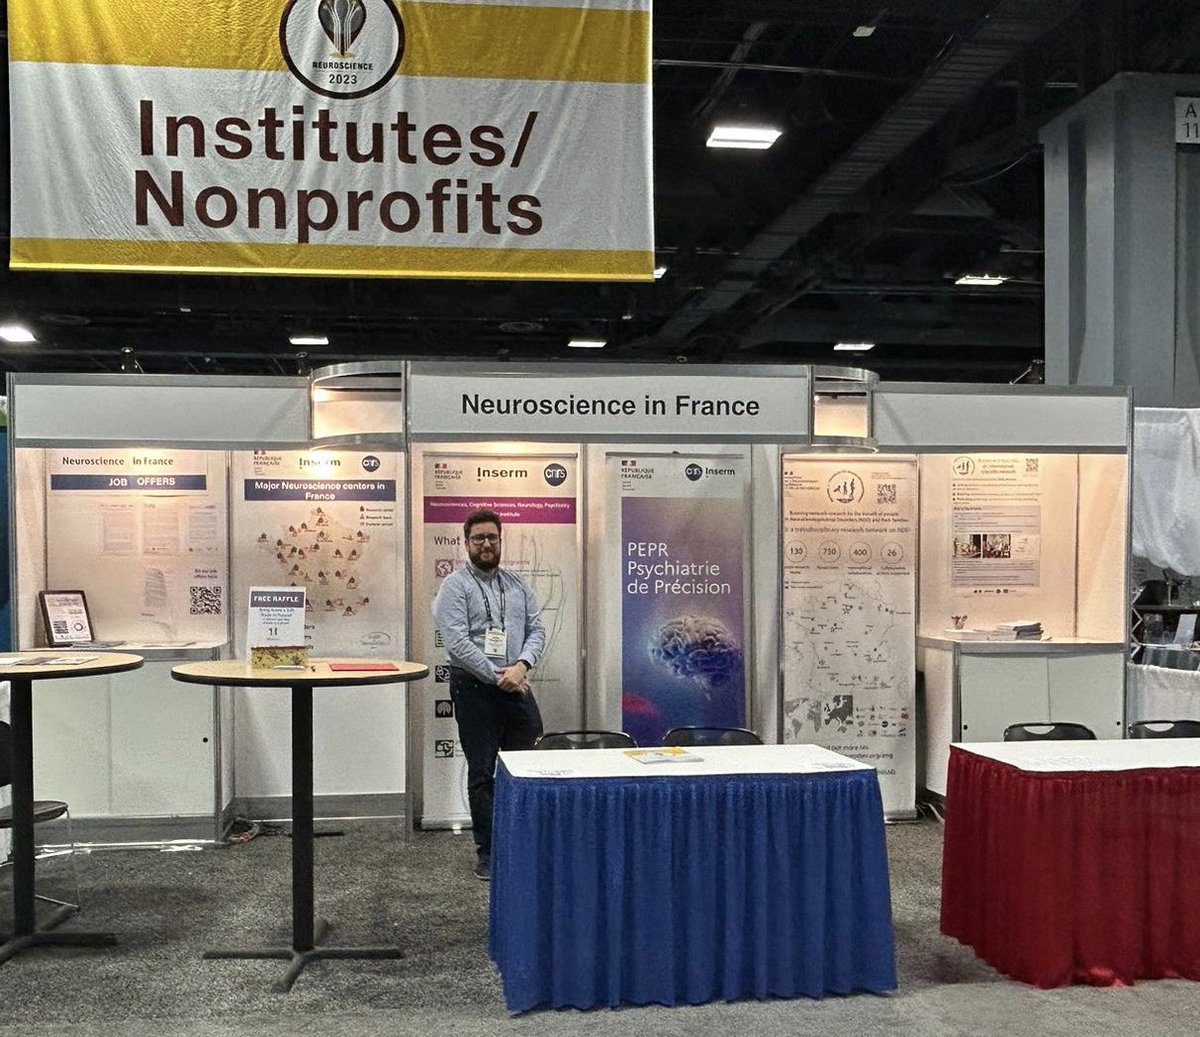 It is still time to visit the booth 3526 « Neuroscience in France » at #SfN2023 to discover job offers, training programs and funding opportunities related to neuroscience in France.

With a special advertisement about the PEPR PROPSY project dedicated to precision #psychiatry.